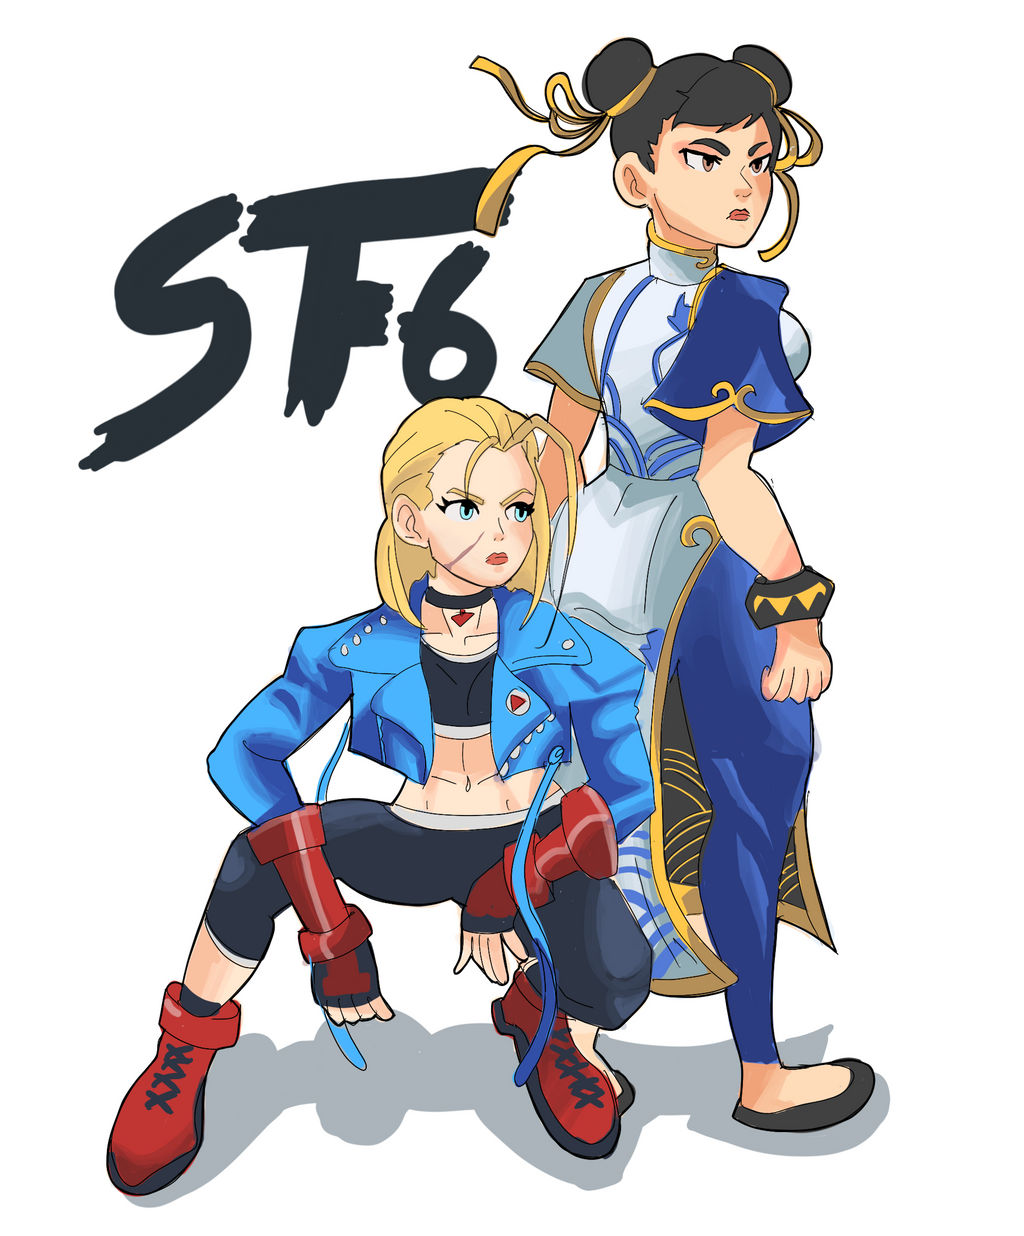 SF5 and SF6 Cammy side-by-side : r/StreetFighter